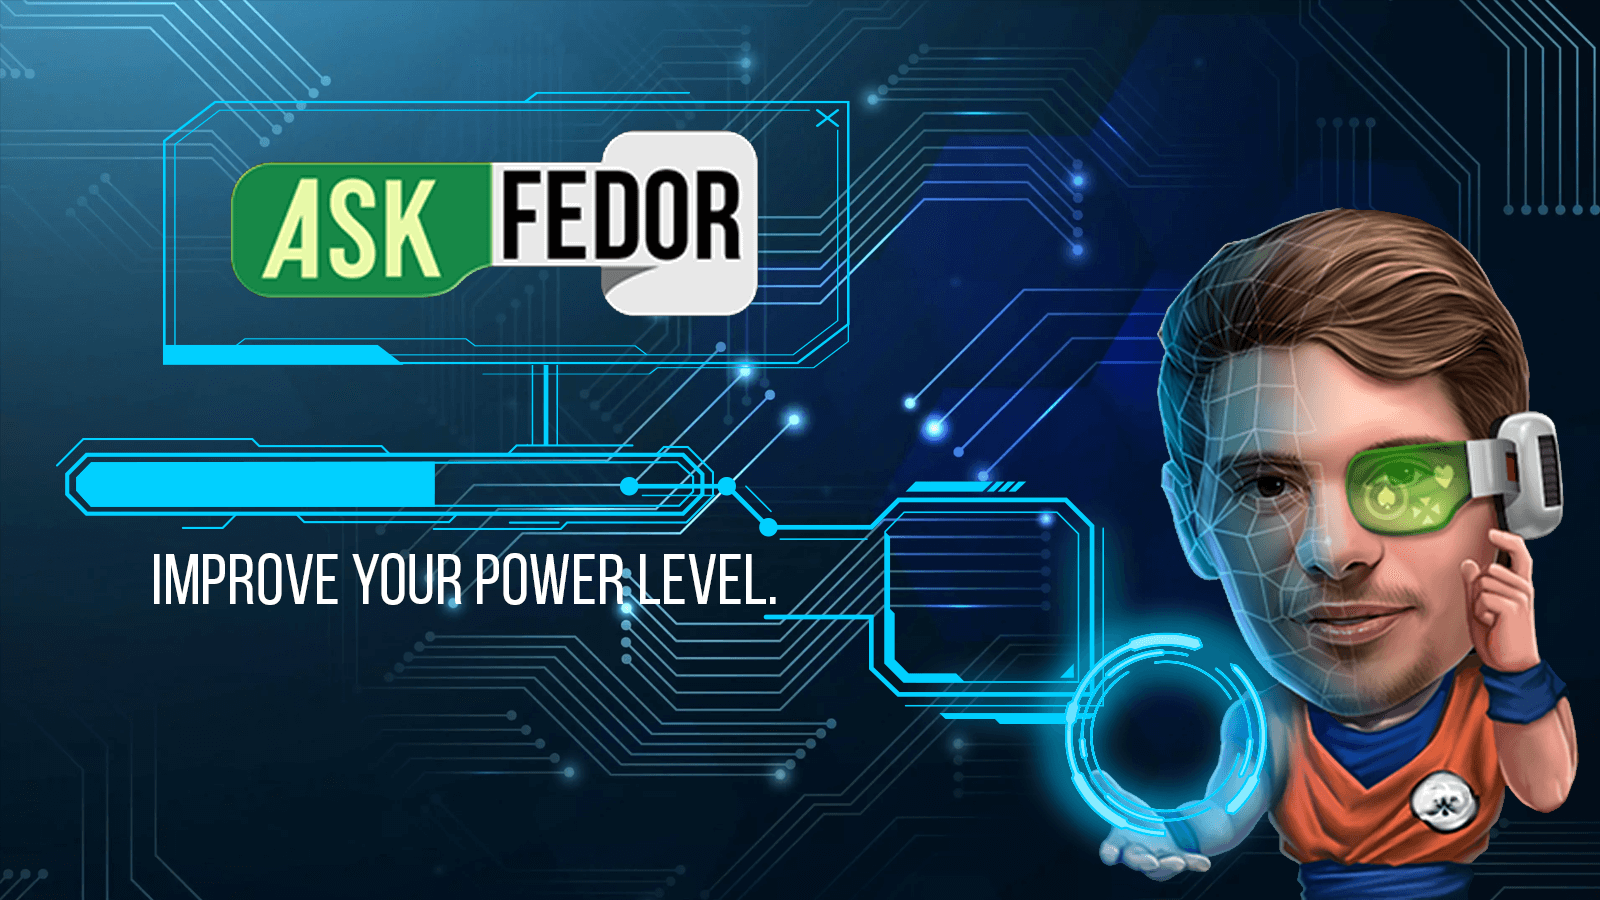 GGPoker Launches ‘Ask Fedor’ Poker Hand Analysis Feature